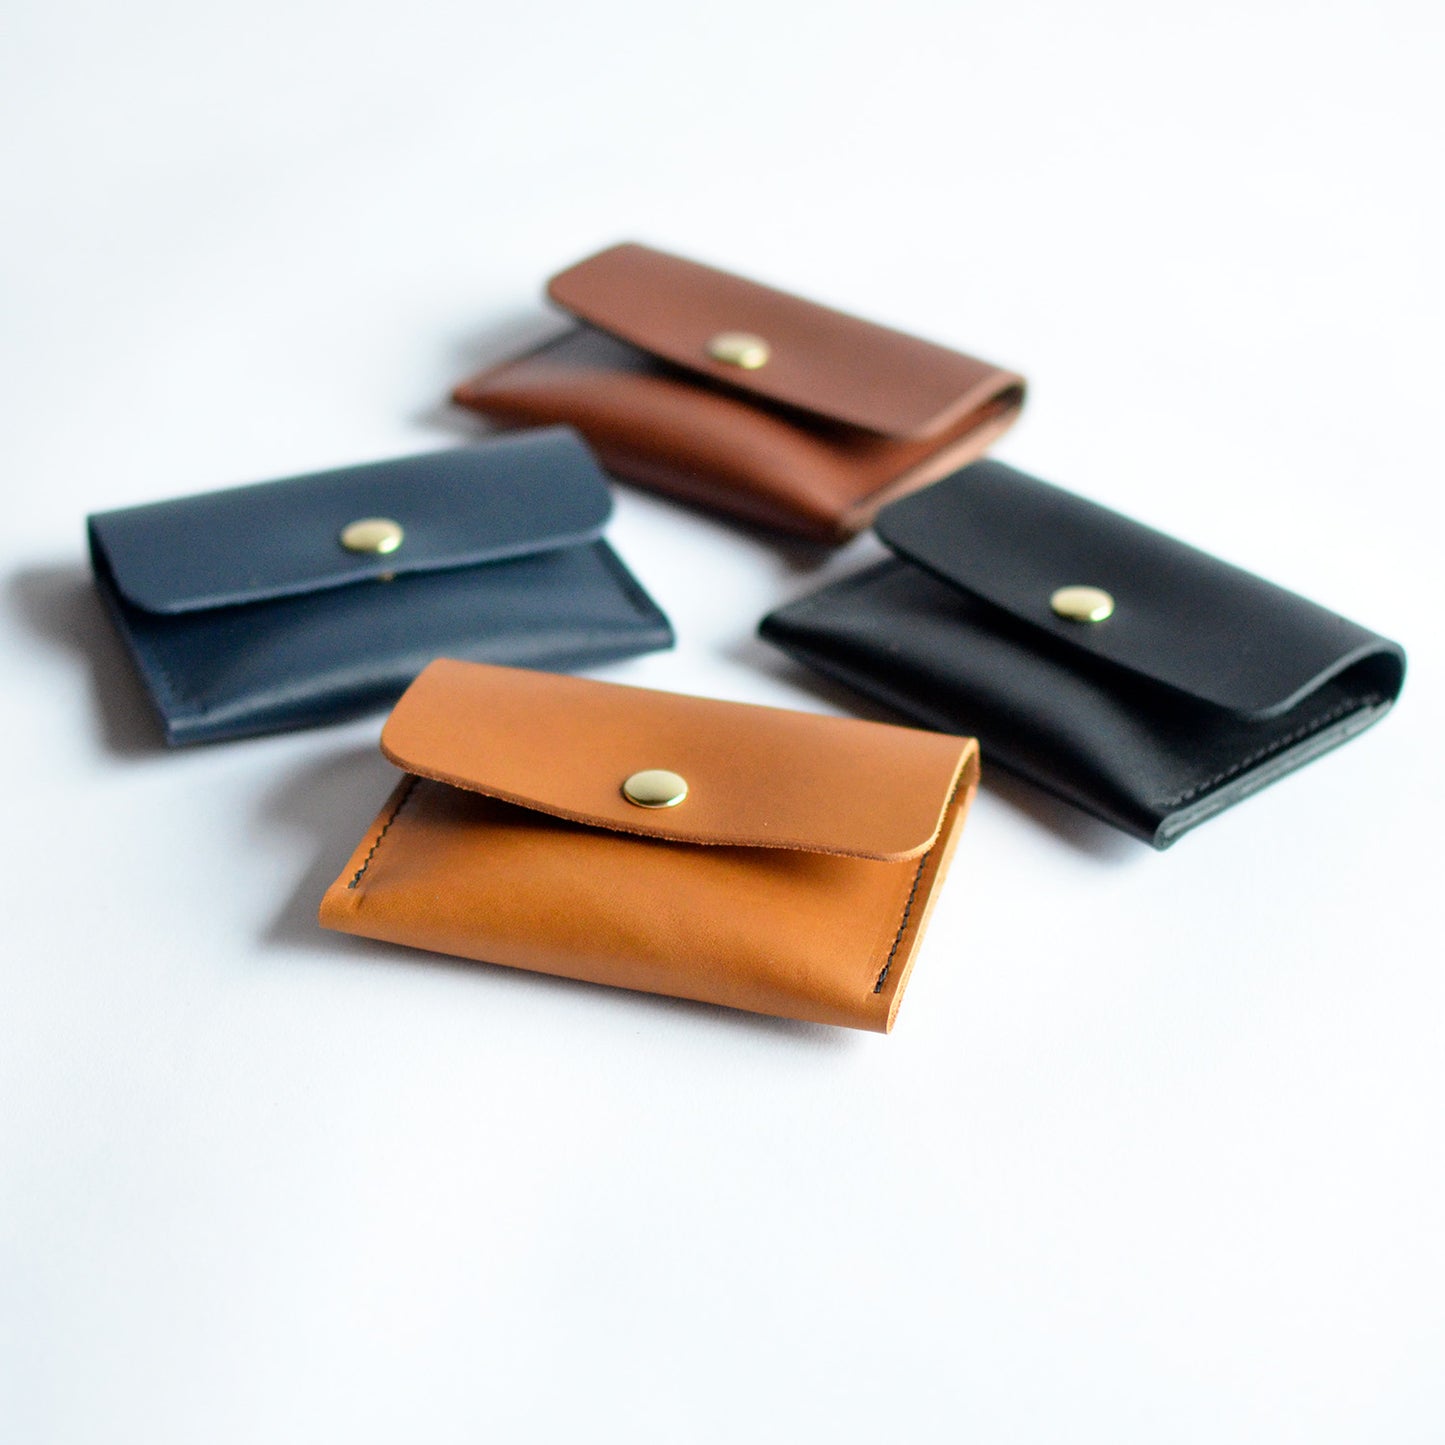 Mini Wallet - Chocolate Brown Leather